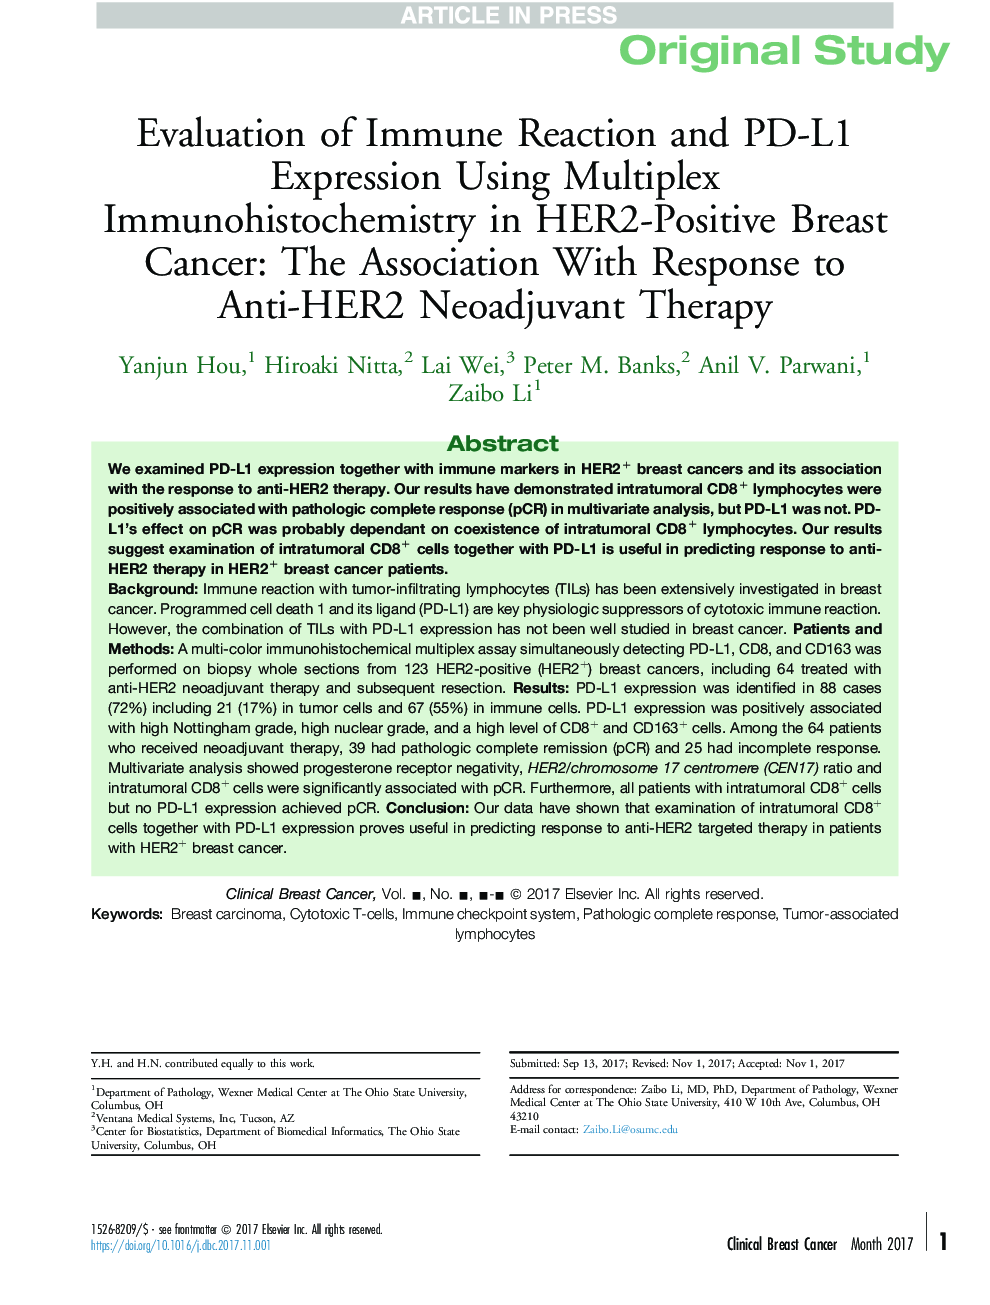 Evaluation of Immune Reaction and PD-L1 Expression Using Multiplex Immunohistochemistry in HER2-Positive Breast Cancer: The Association With Response to Anti-HER2 Neoadjuvant Therapy